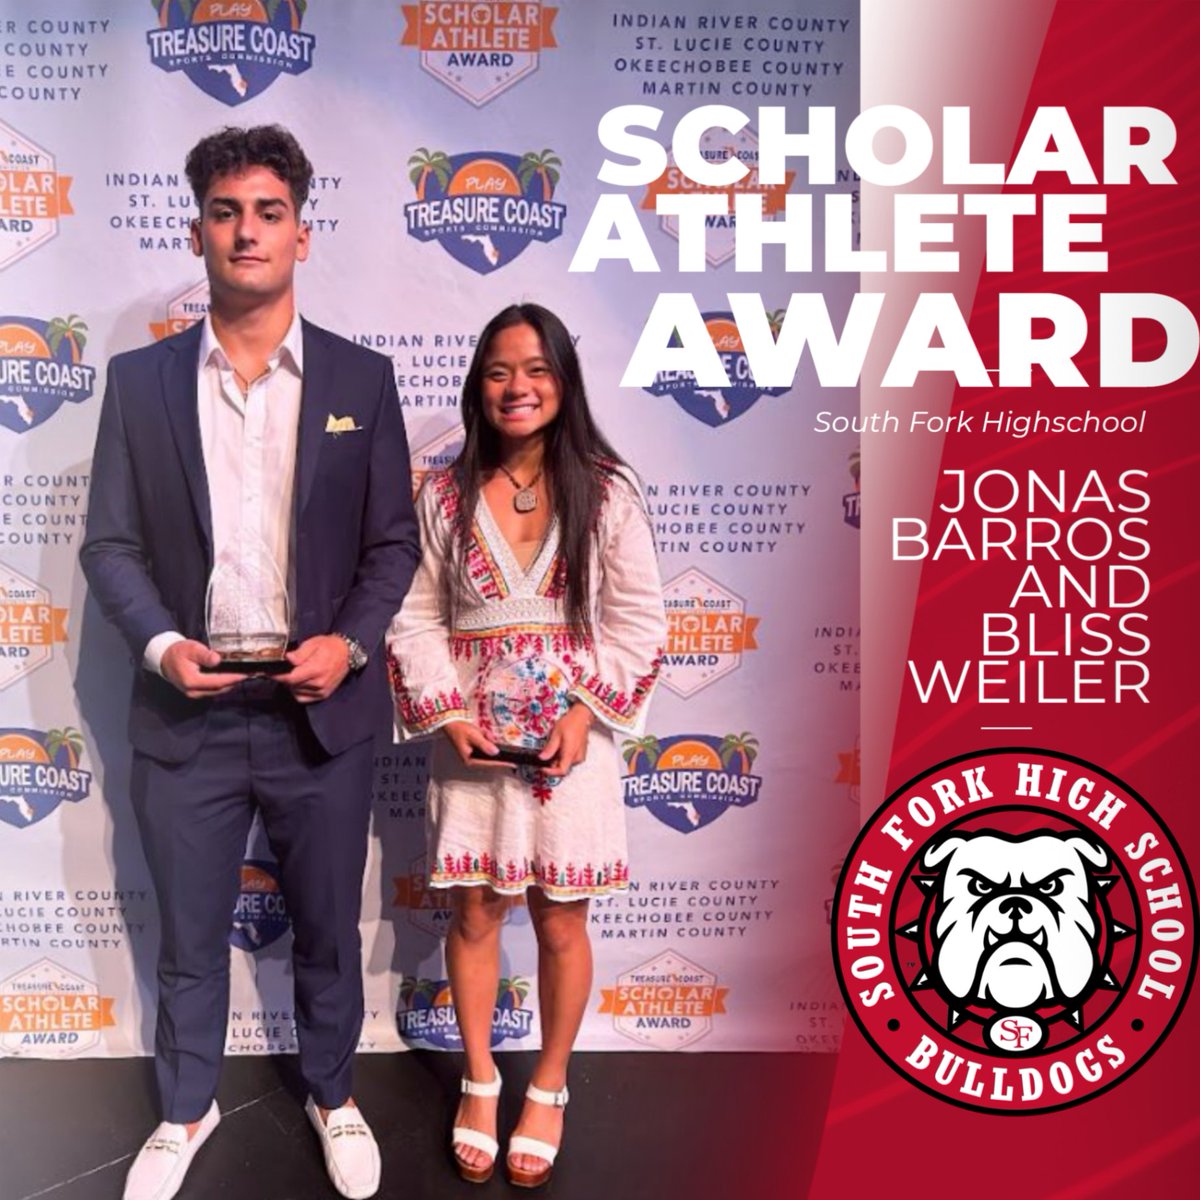 Congratulations to Bulldogs Jonas Barros and Bliss Weiler for being selected as this years scholar athletes.  #GoBulldogs